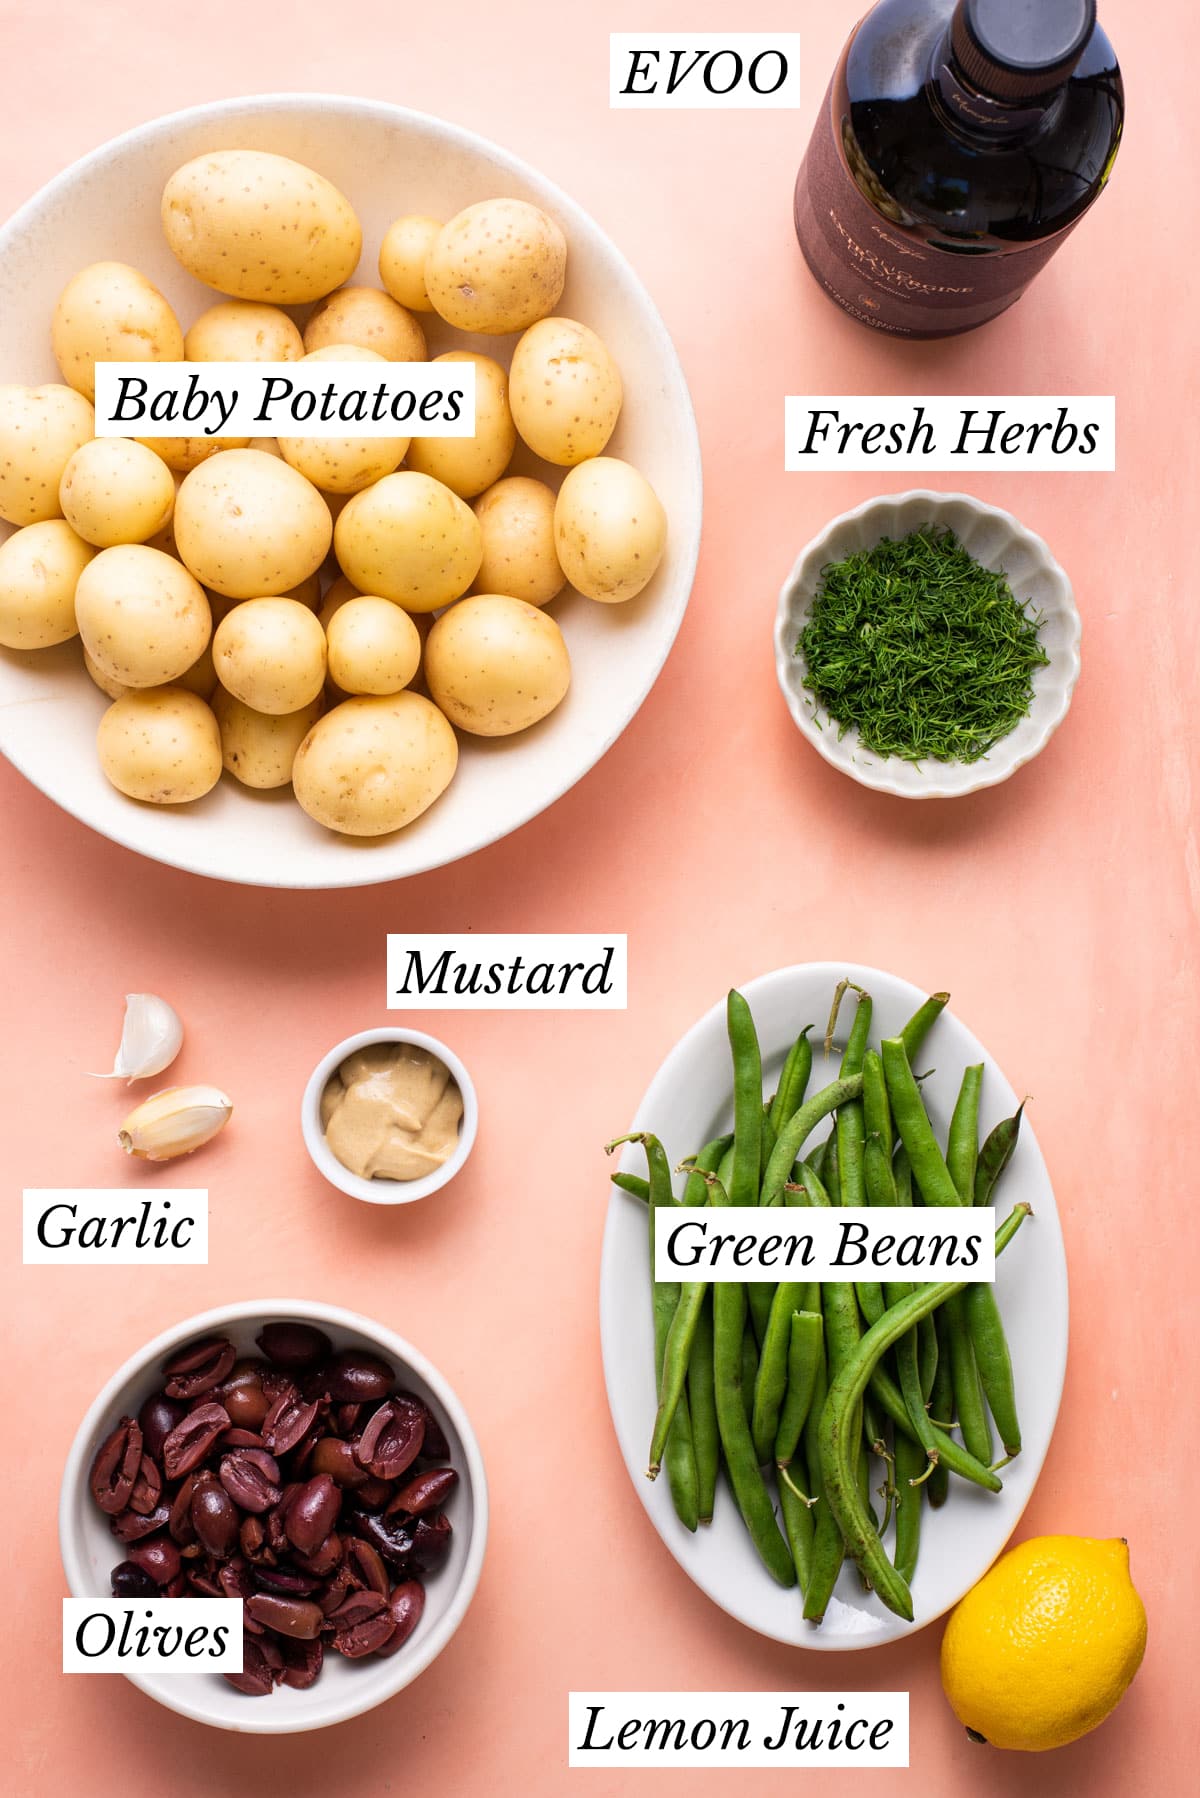 Ingredients gathered to make warm potato salad with olives and green beans.